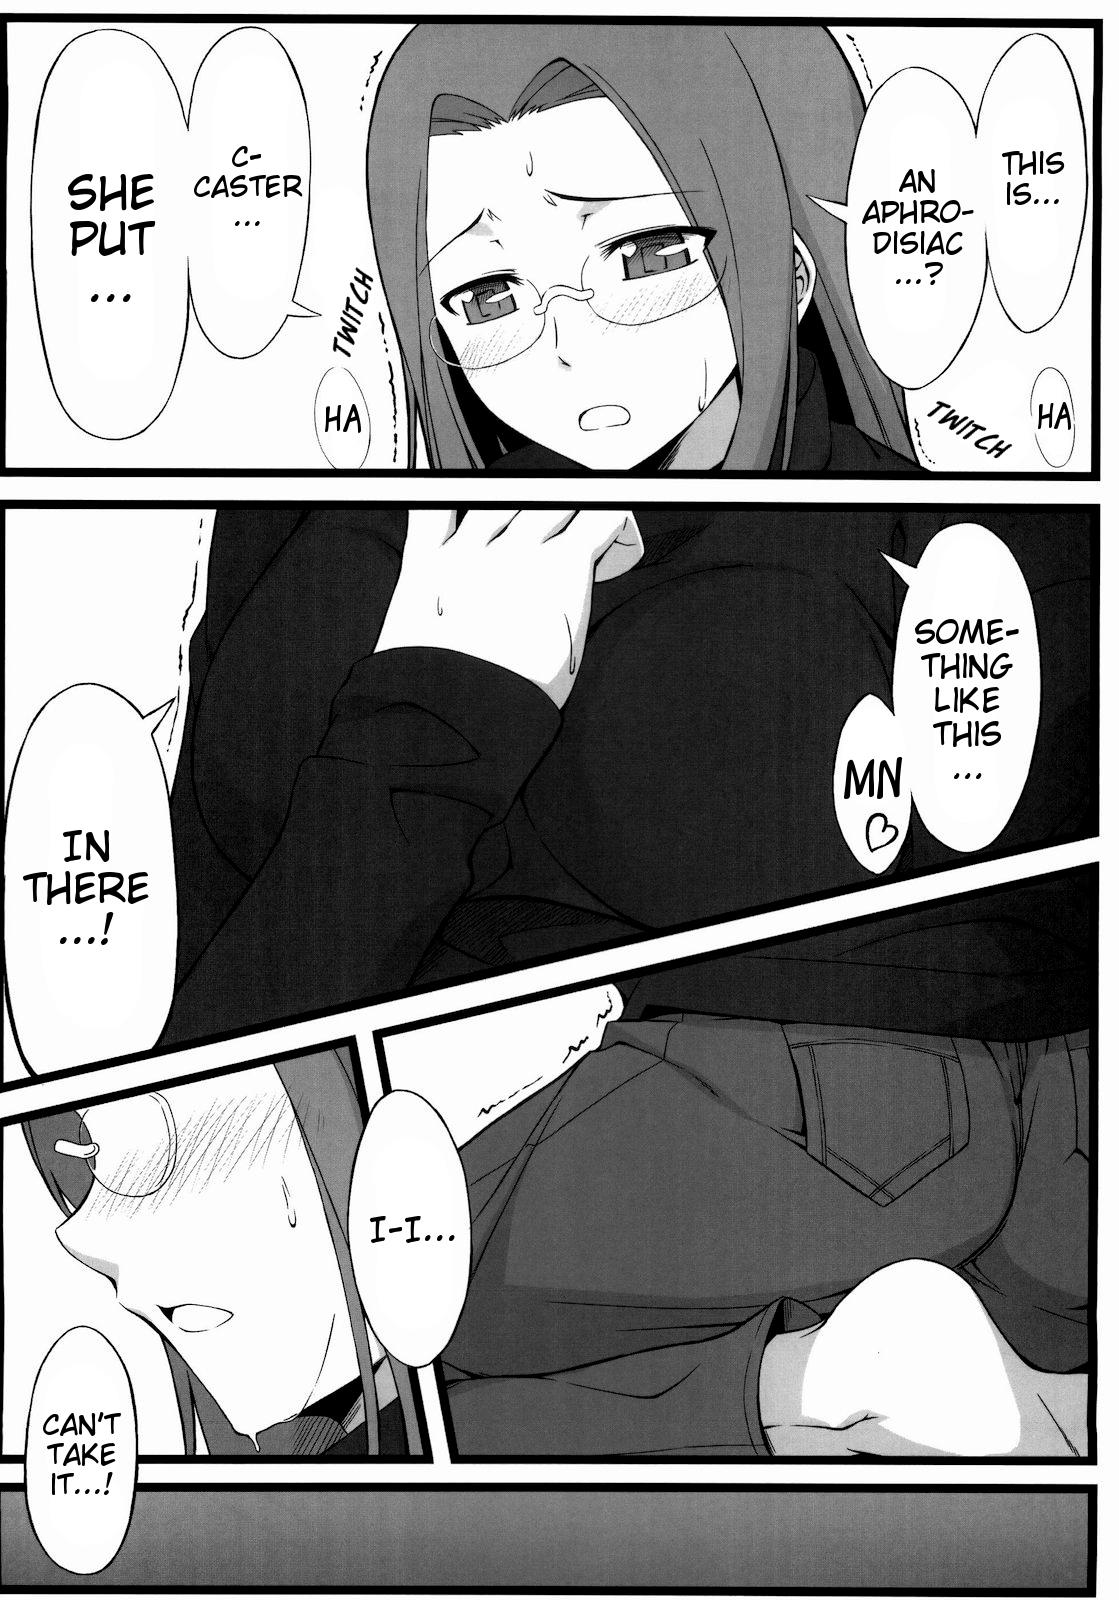 Spreading TEMPTATION - Fate stay night Amateurs - Page 7